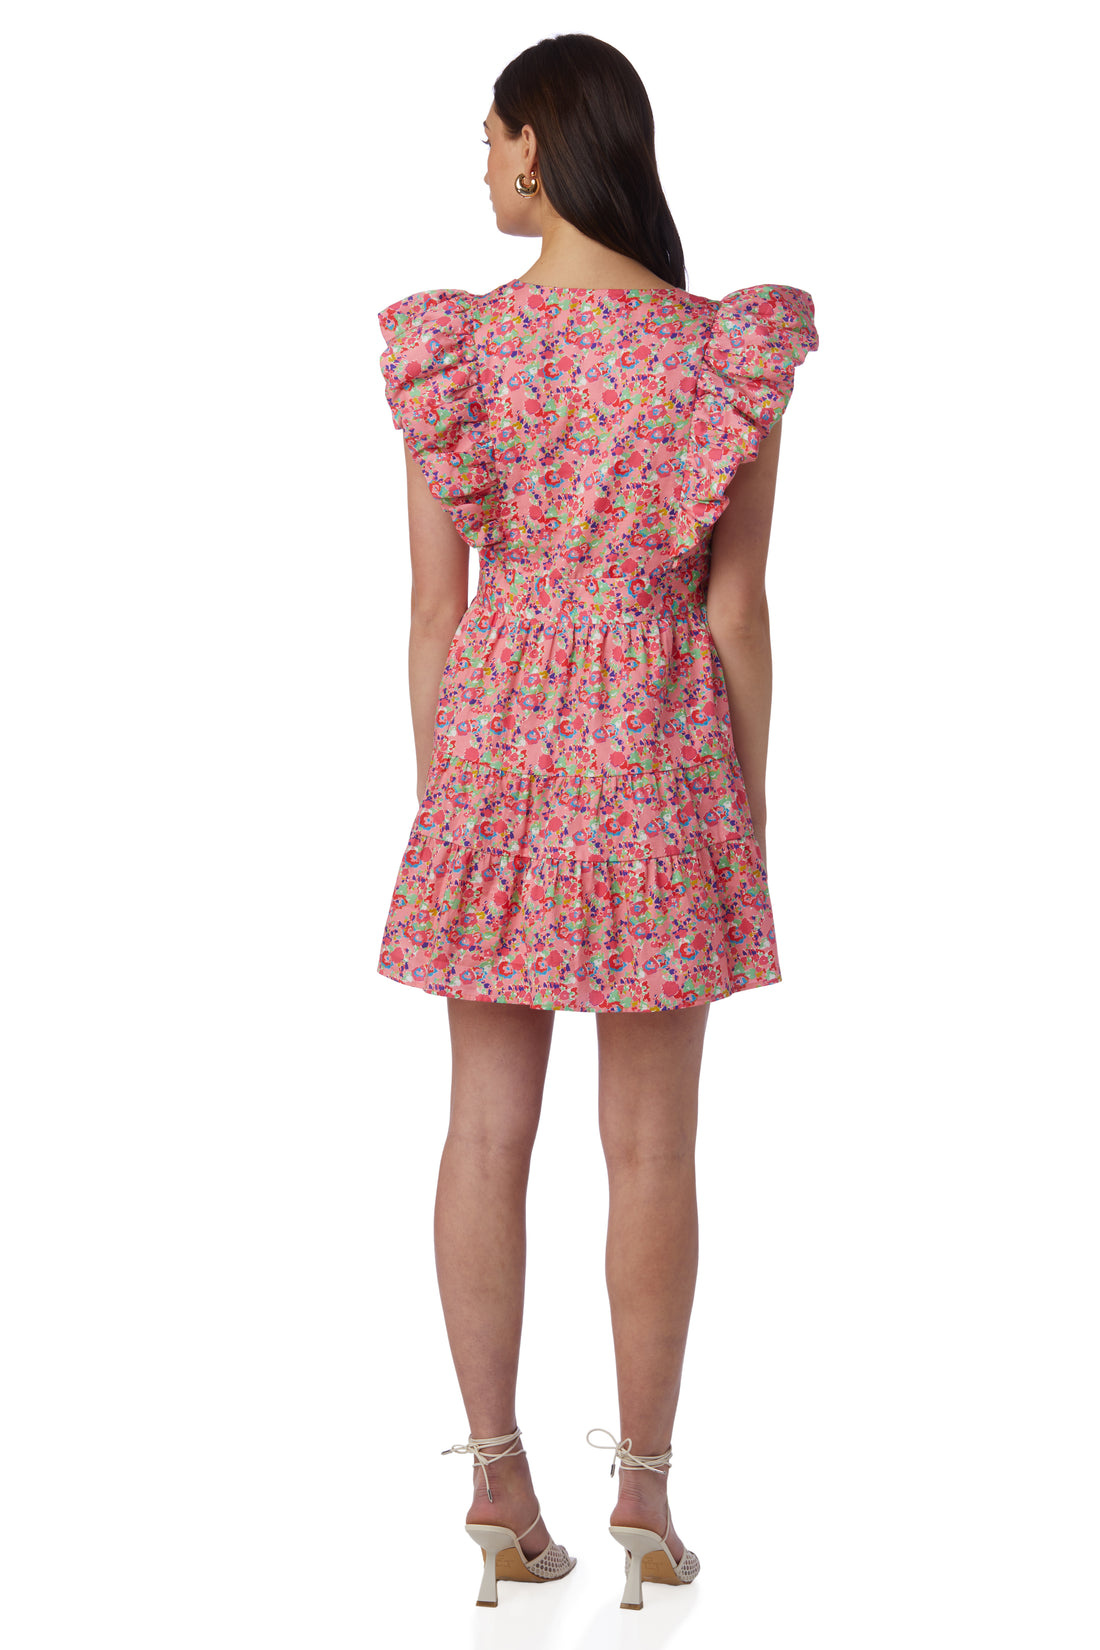 Crosby By Mollie Burch Holcomb Dress - Bougainvillea